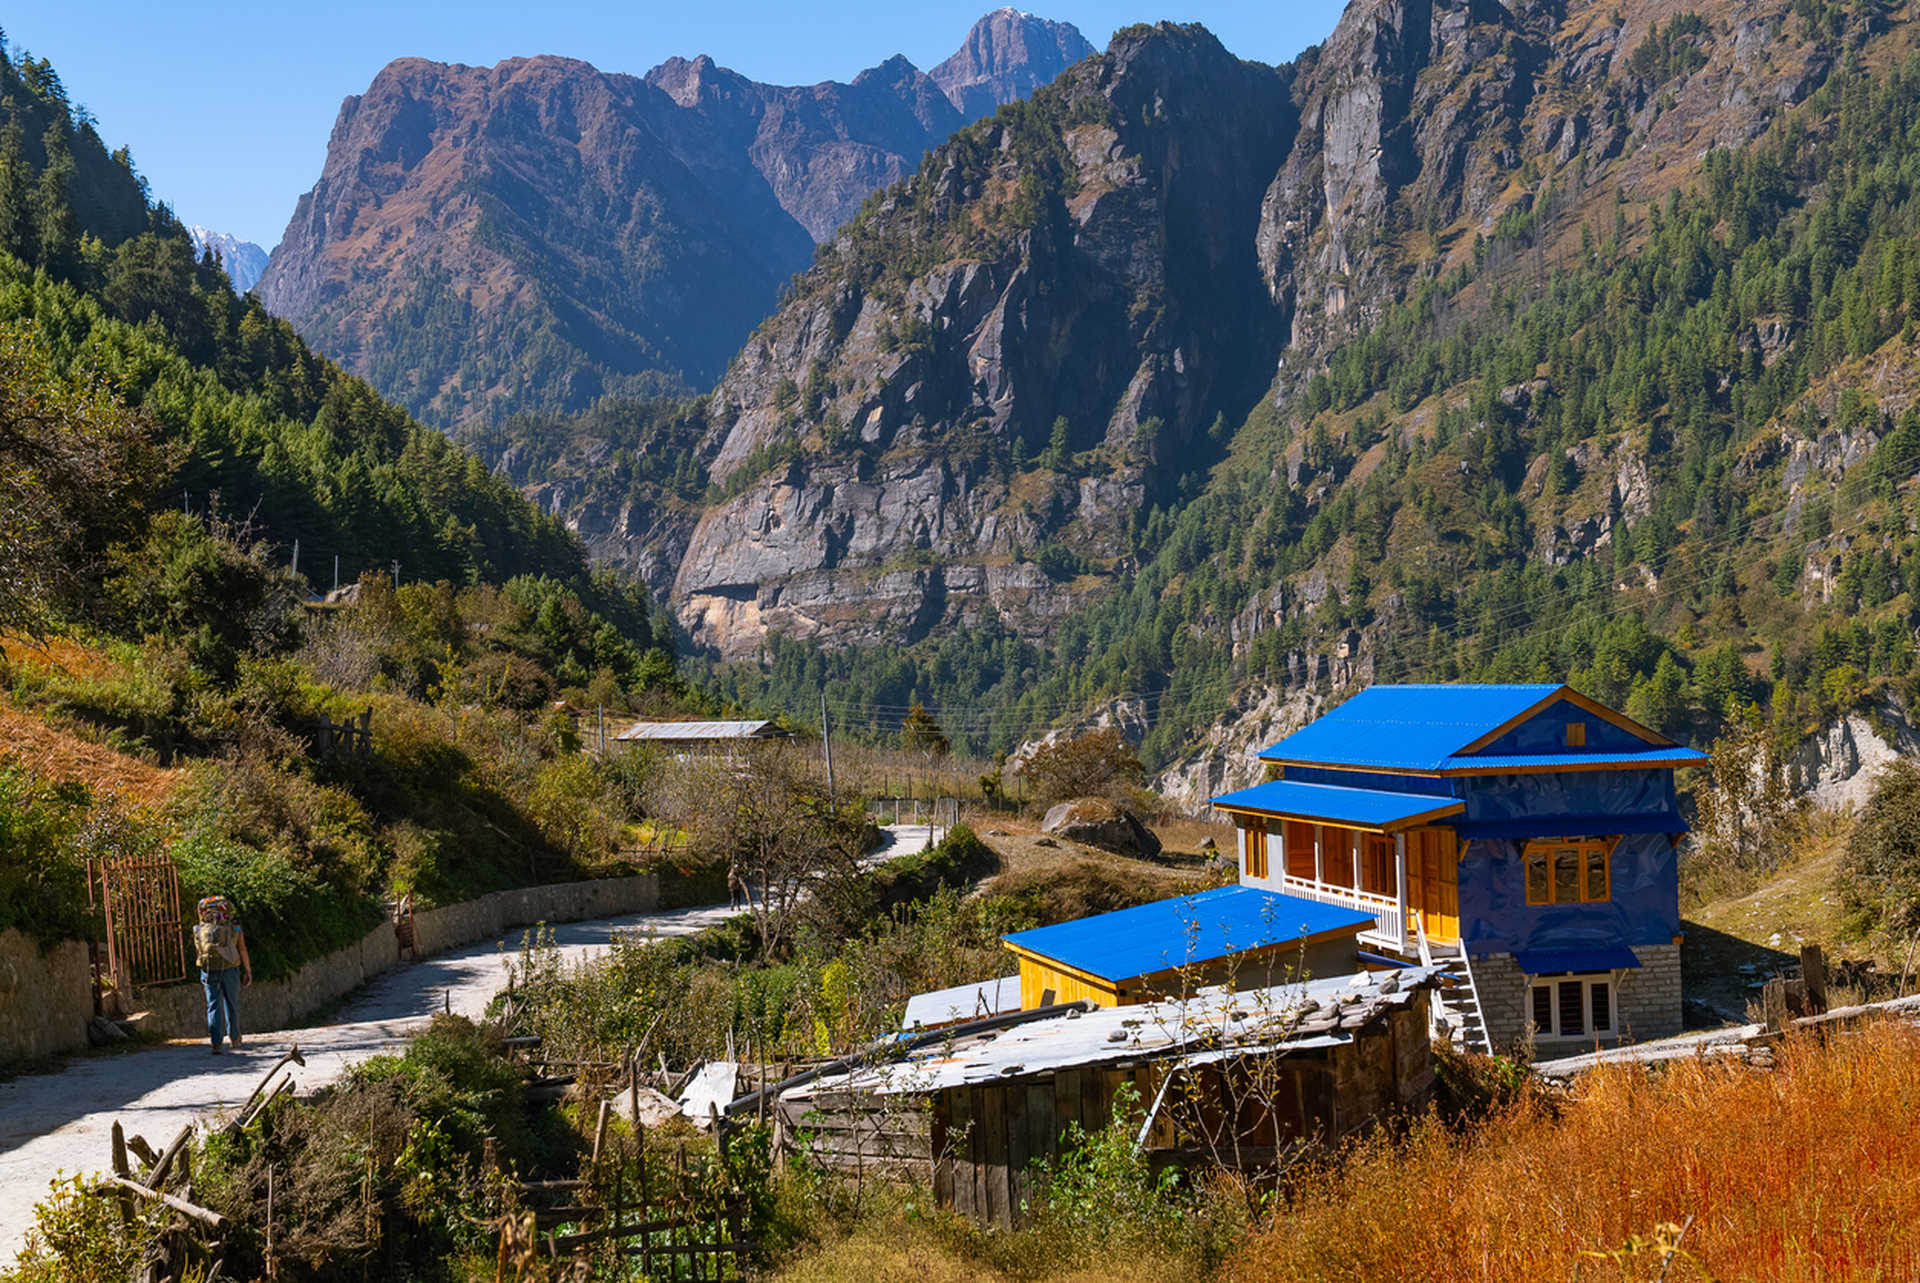 Teahouse in the Himalayas